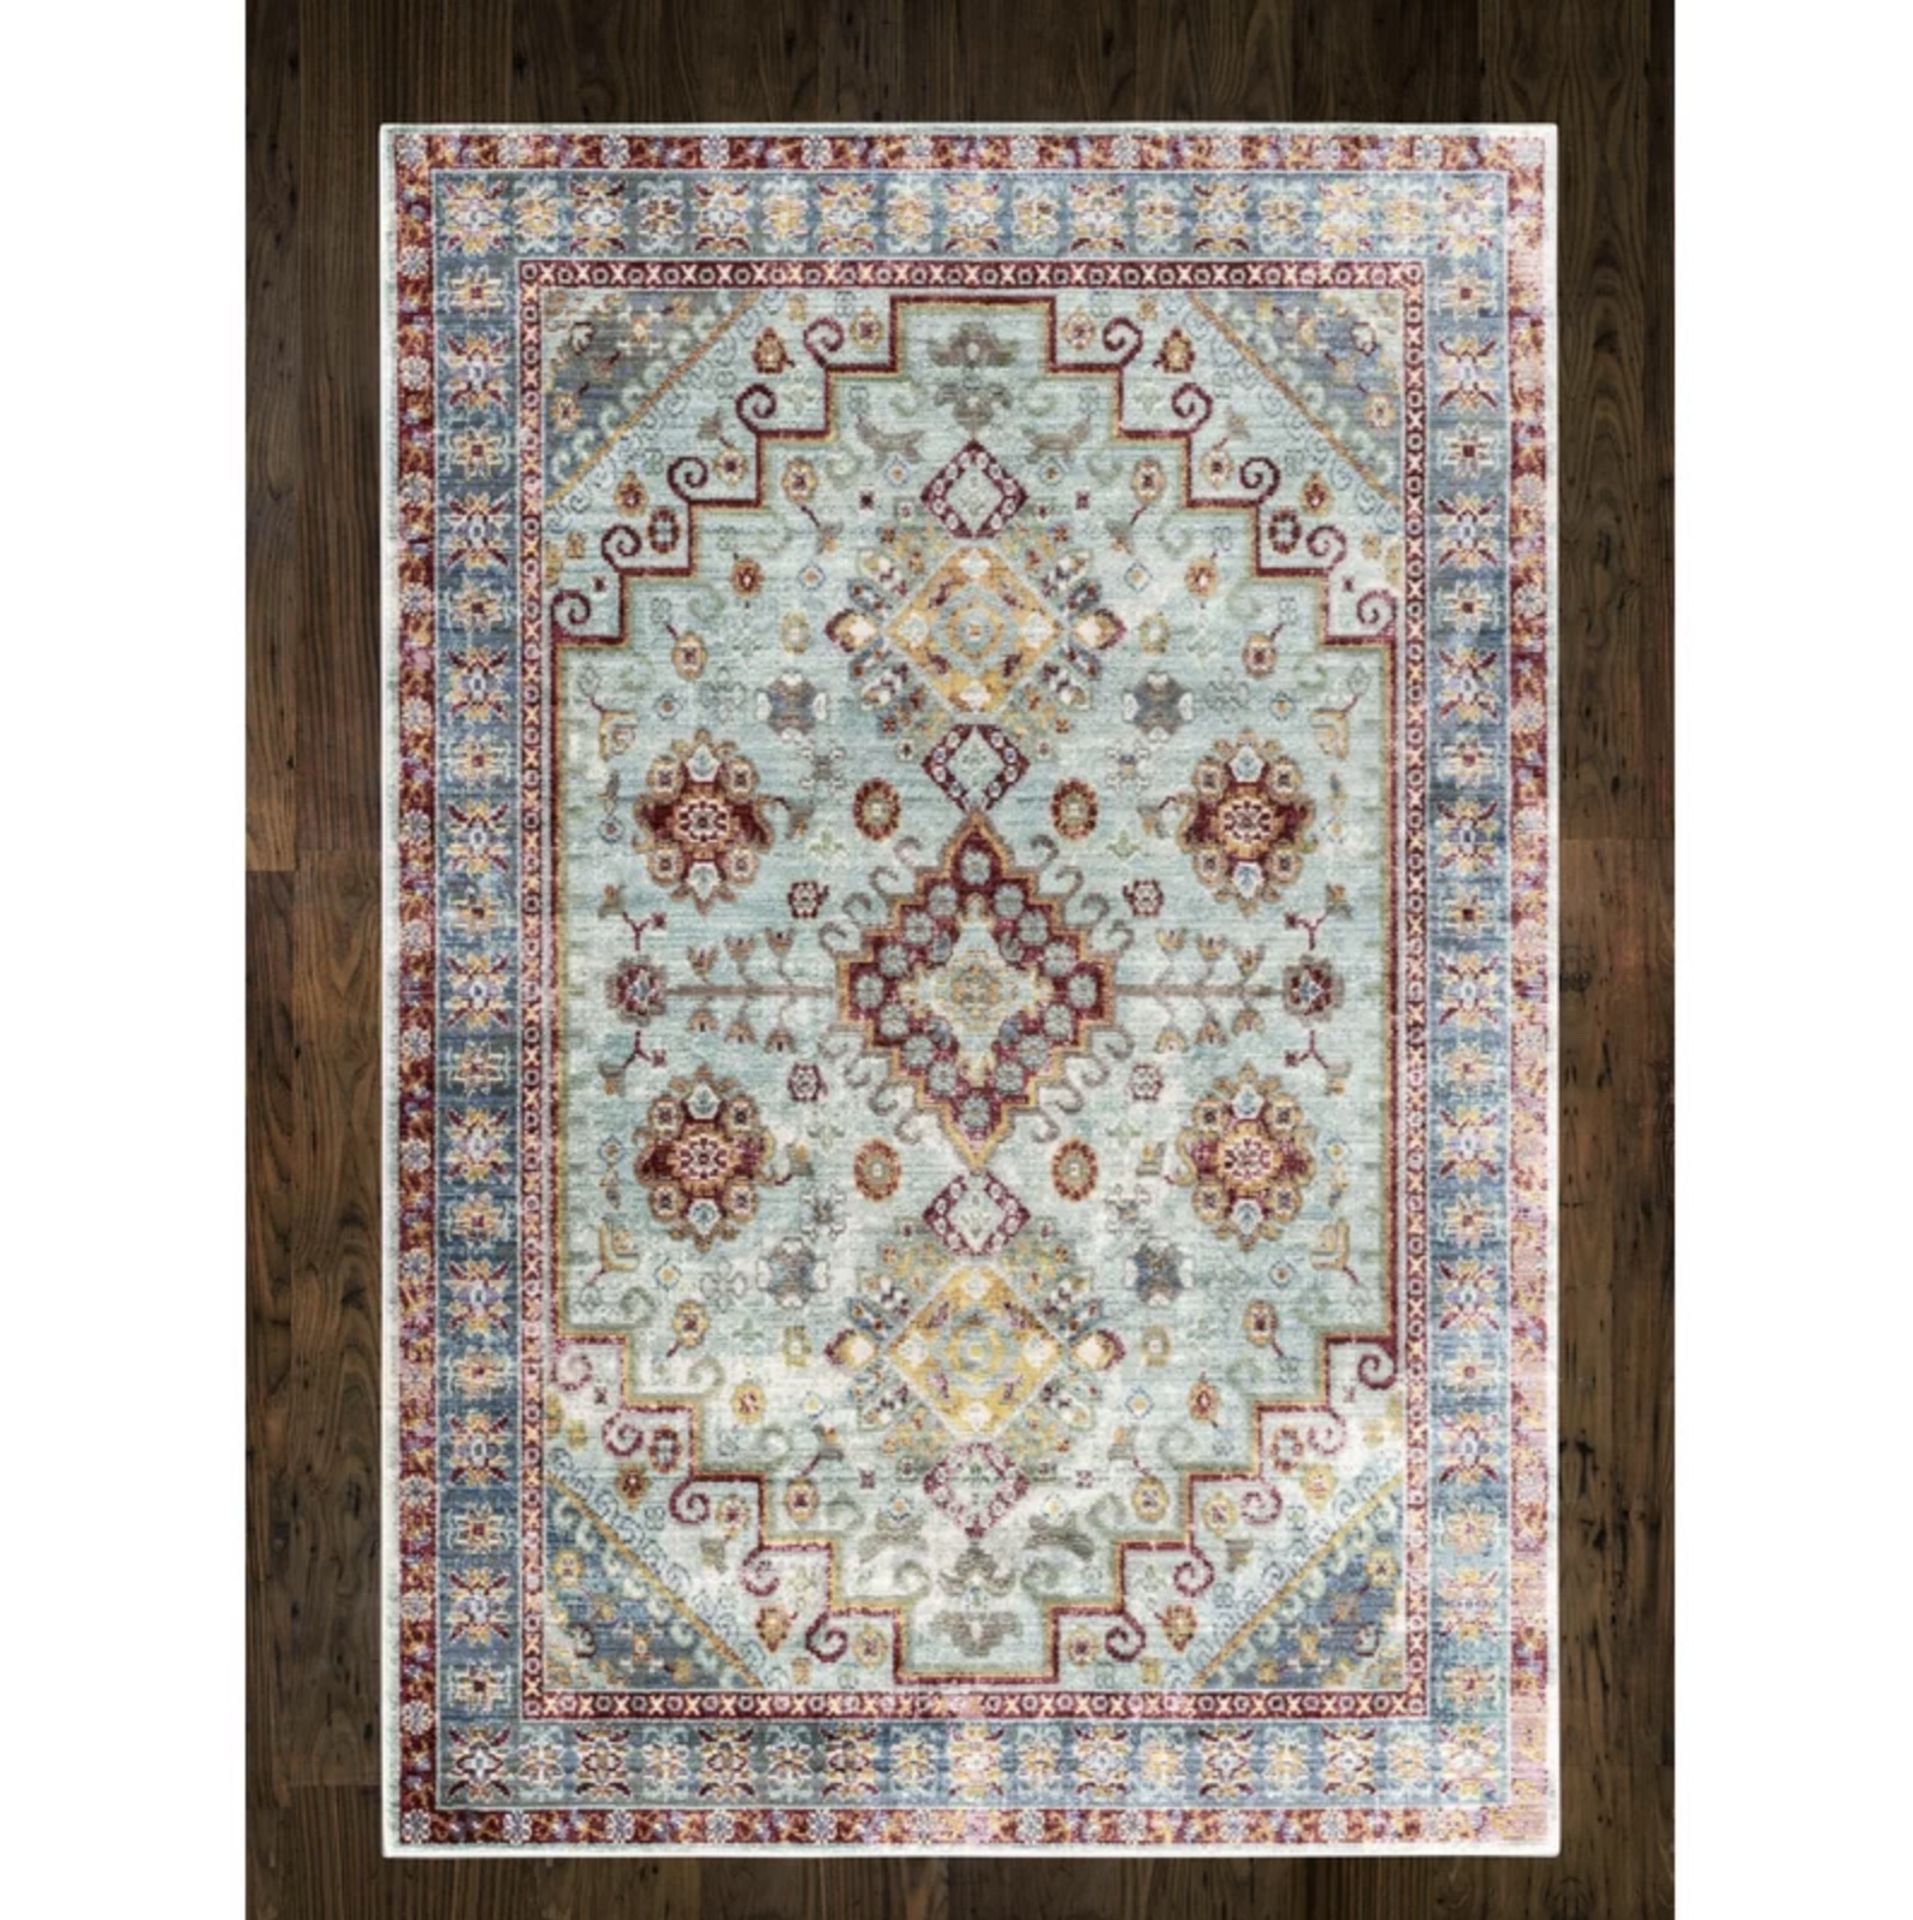 Aqua Rug The Rug has a soft silky touch with a cotton backing. It has a sophisticated colouring